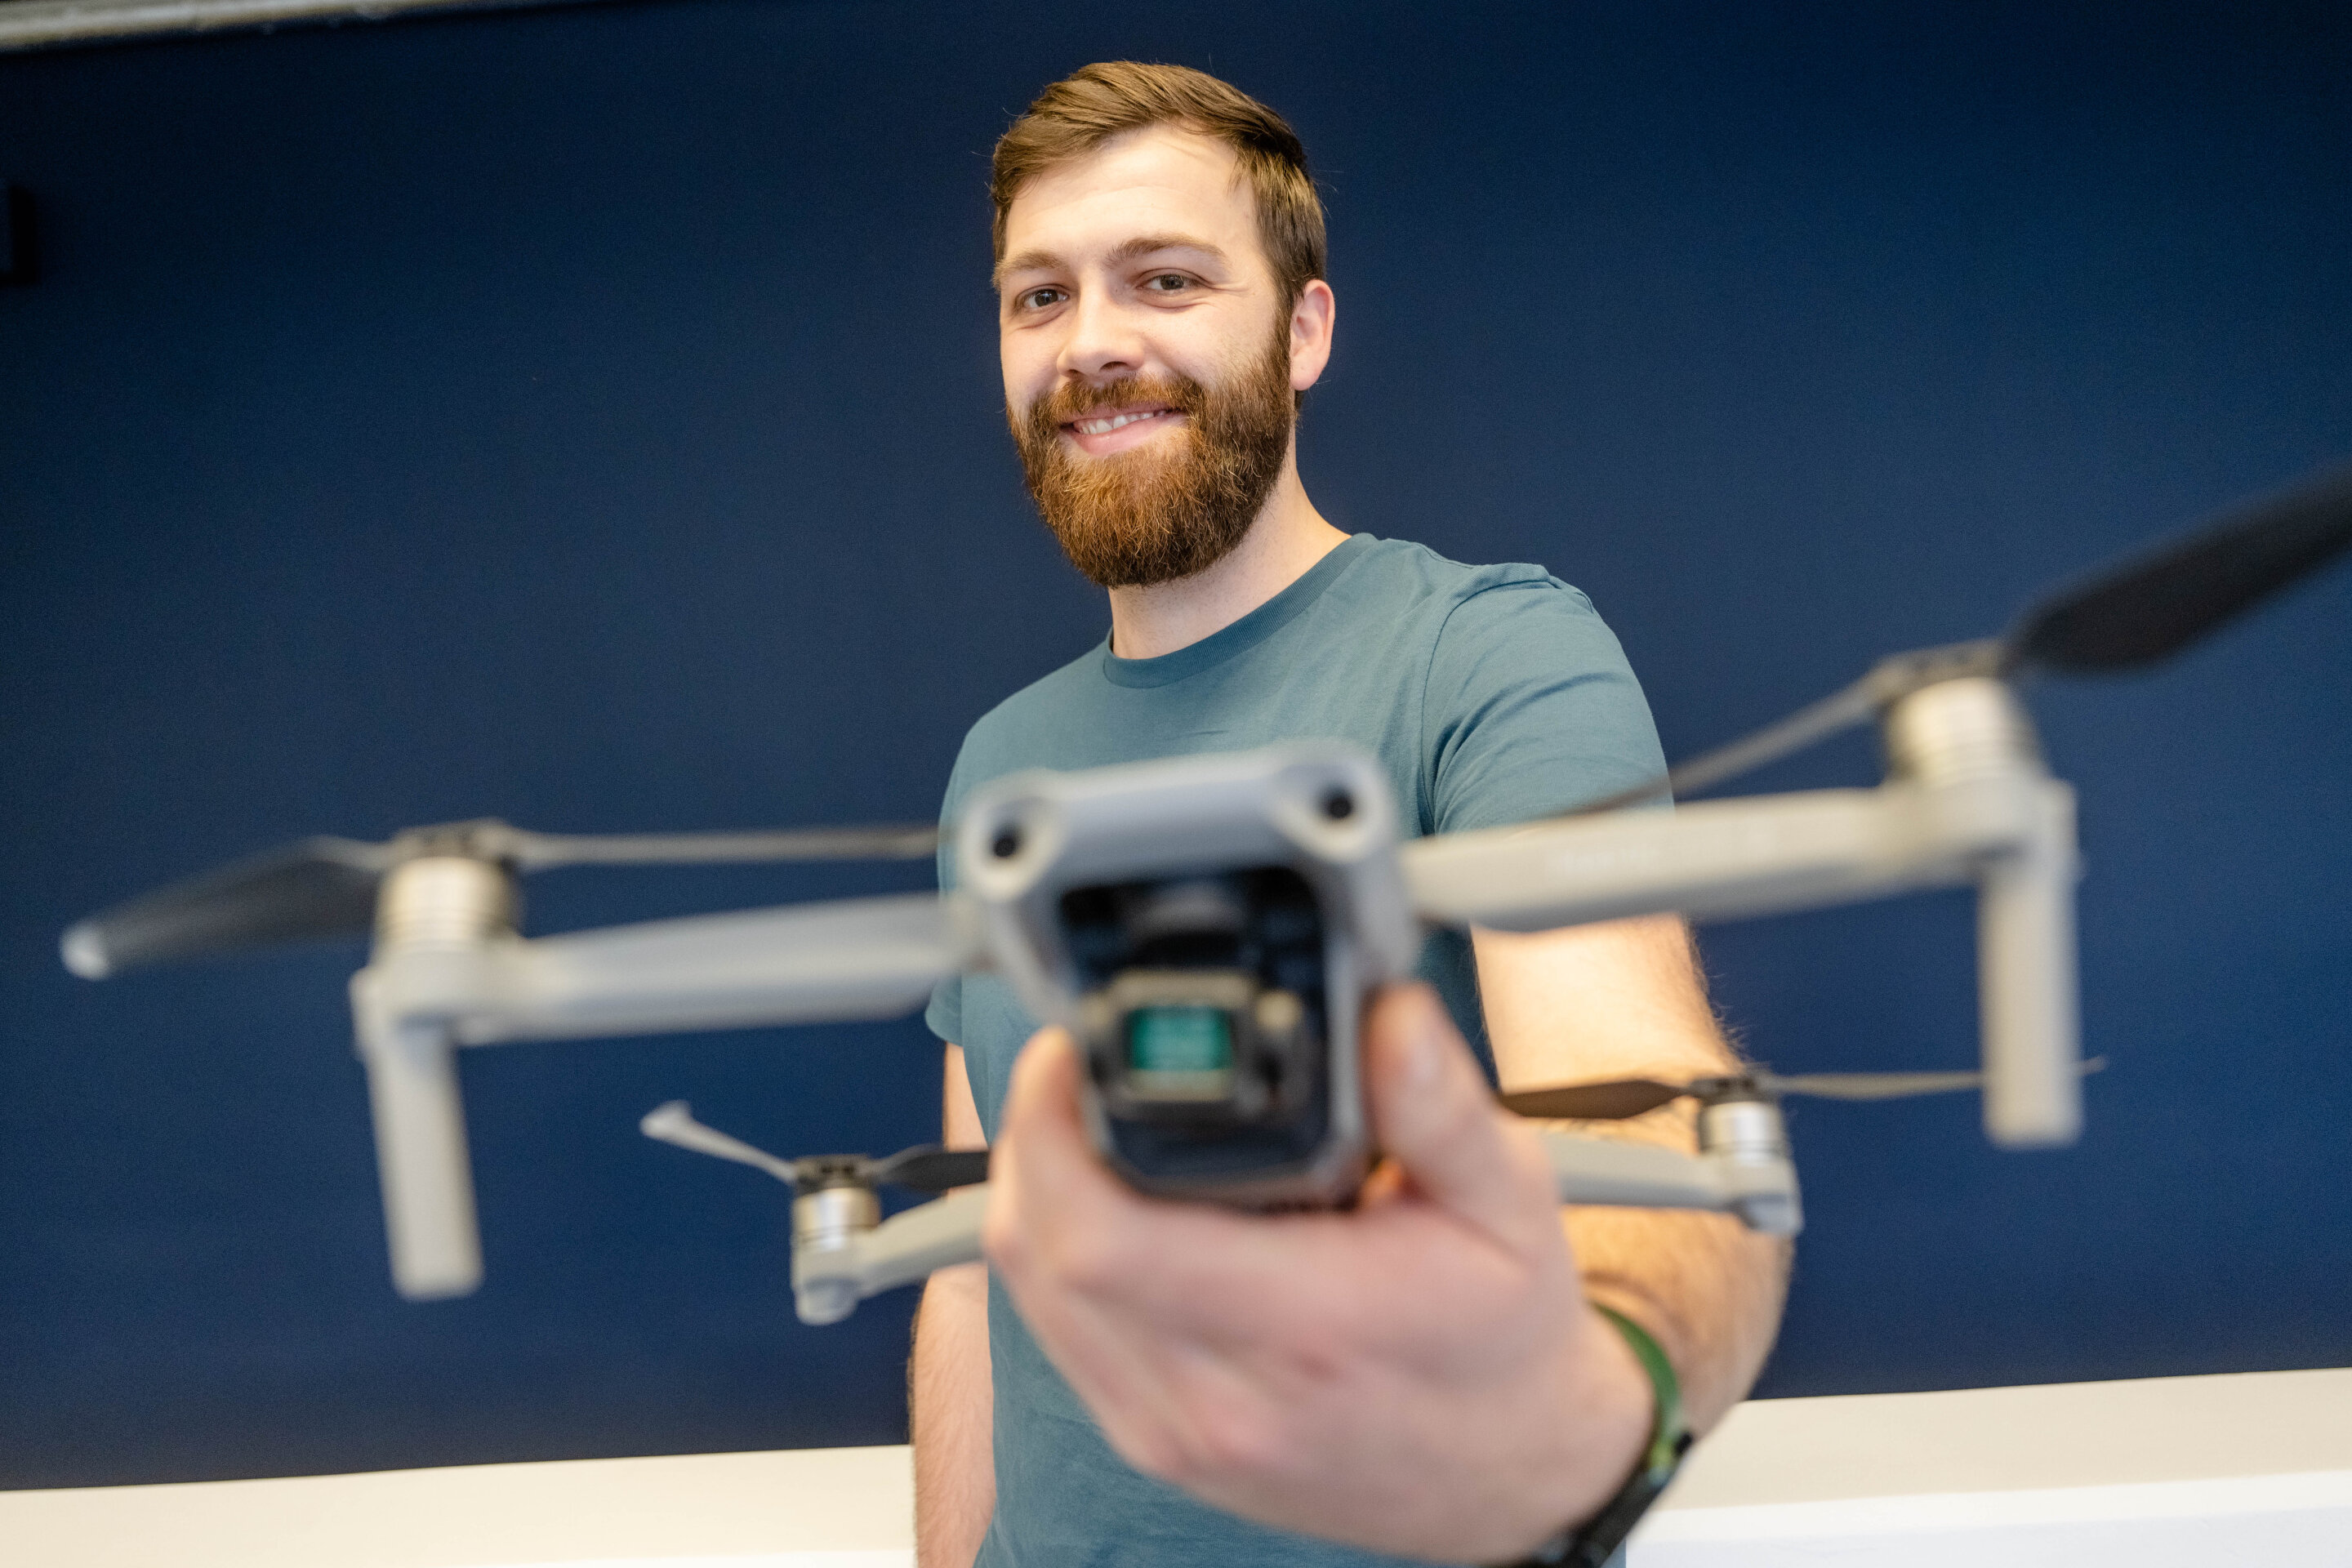 #Security vulnerabilities detected in drones made by DJI